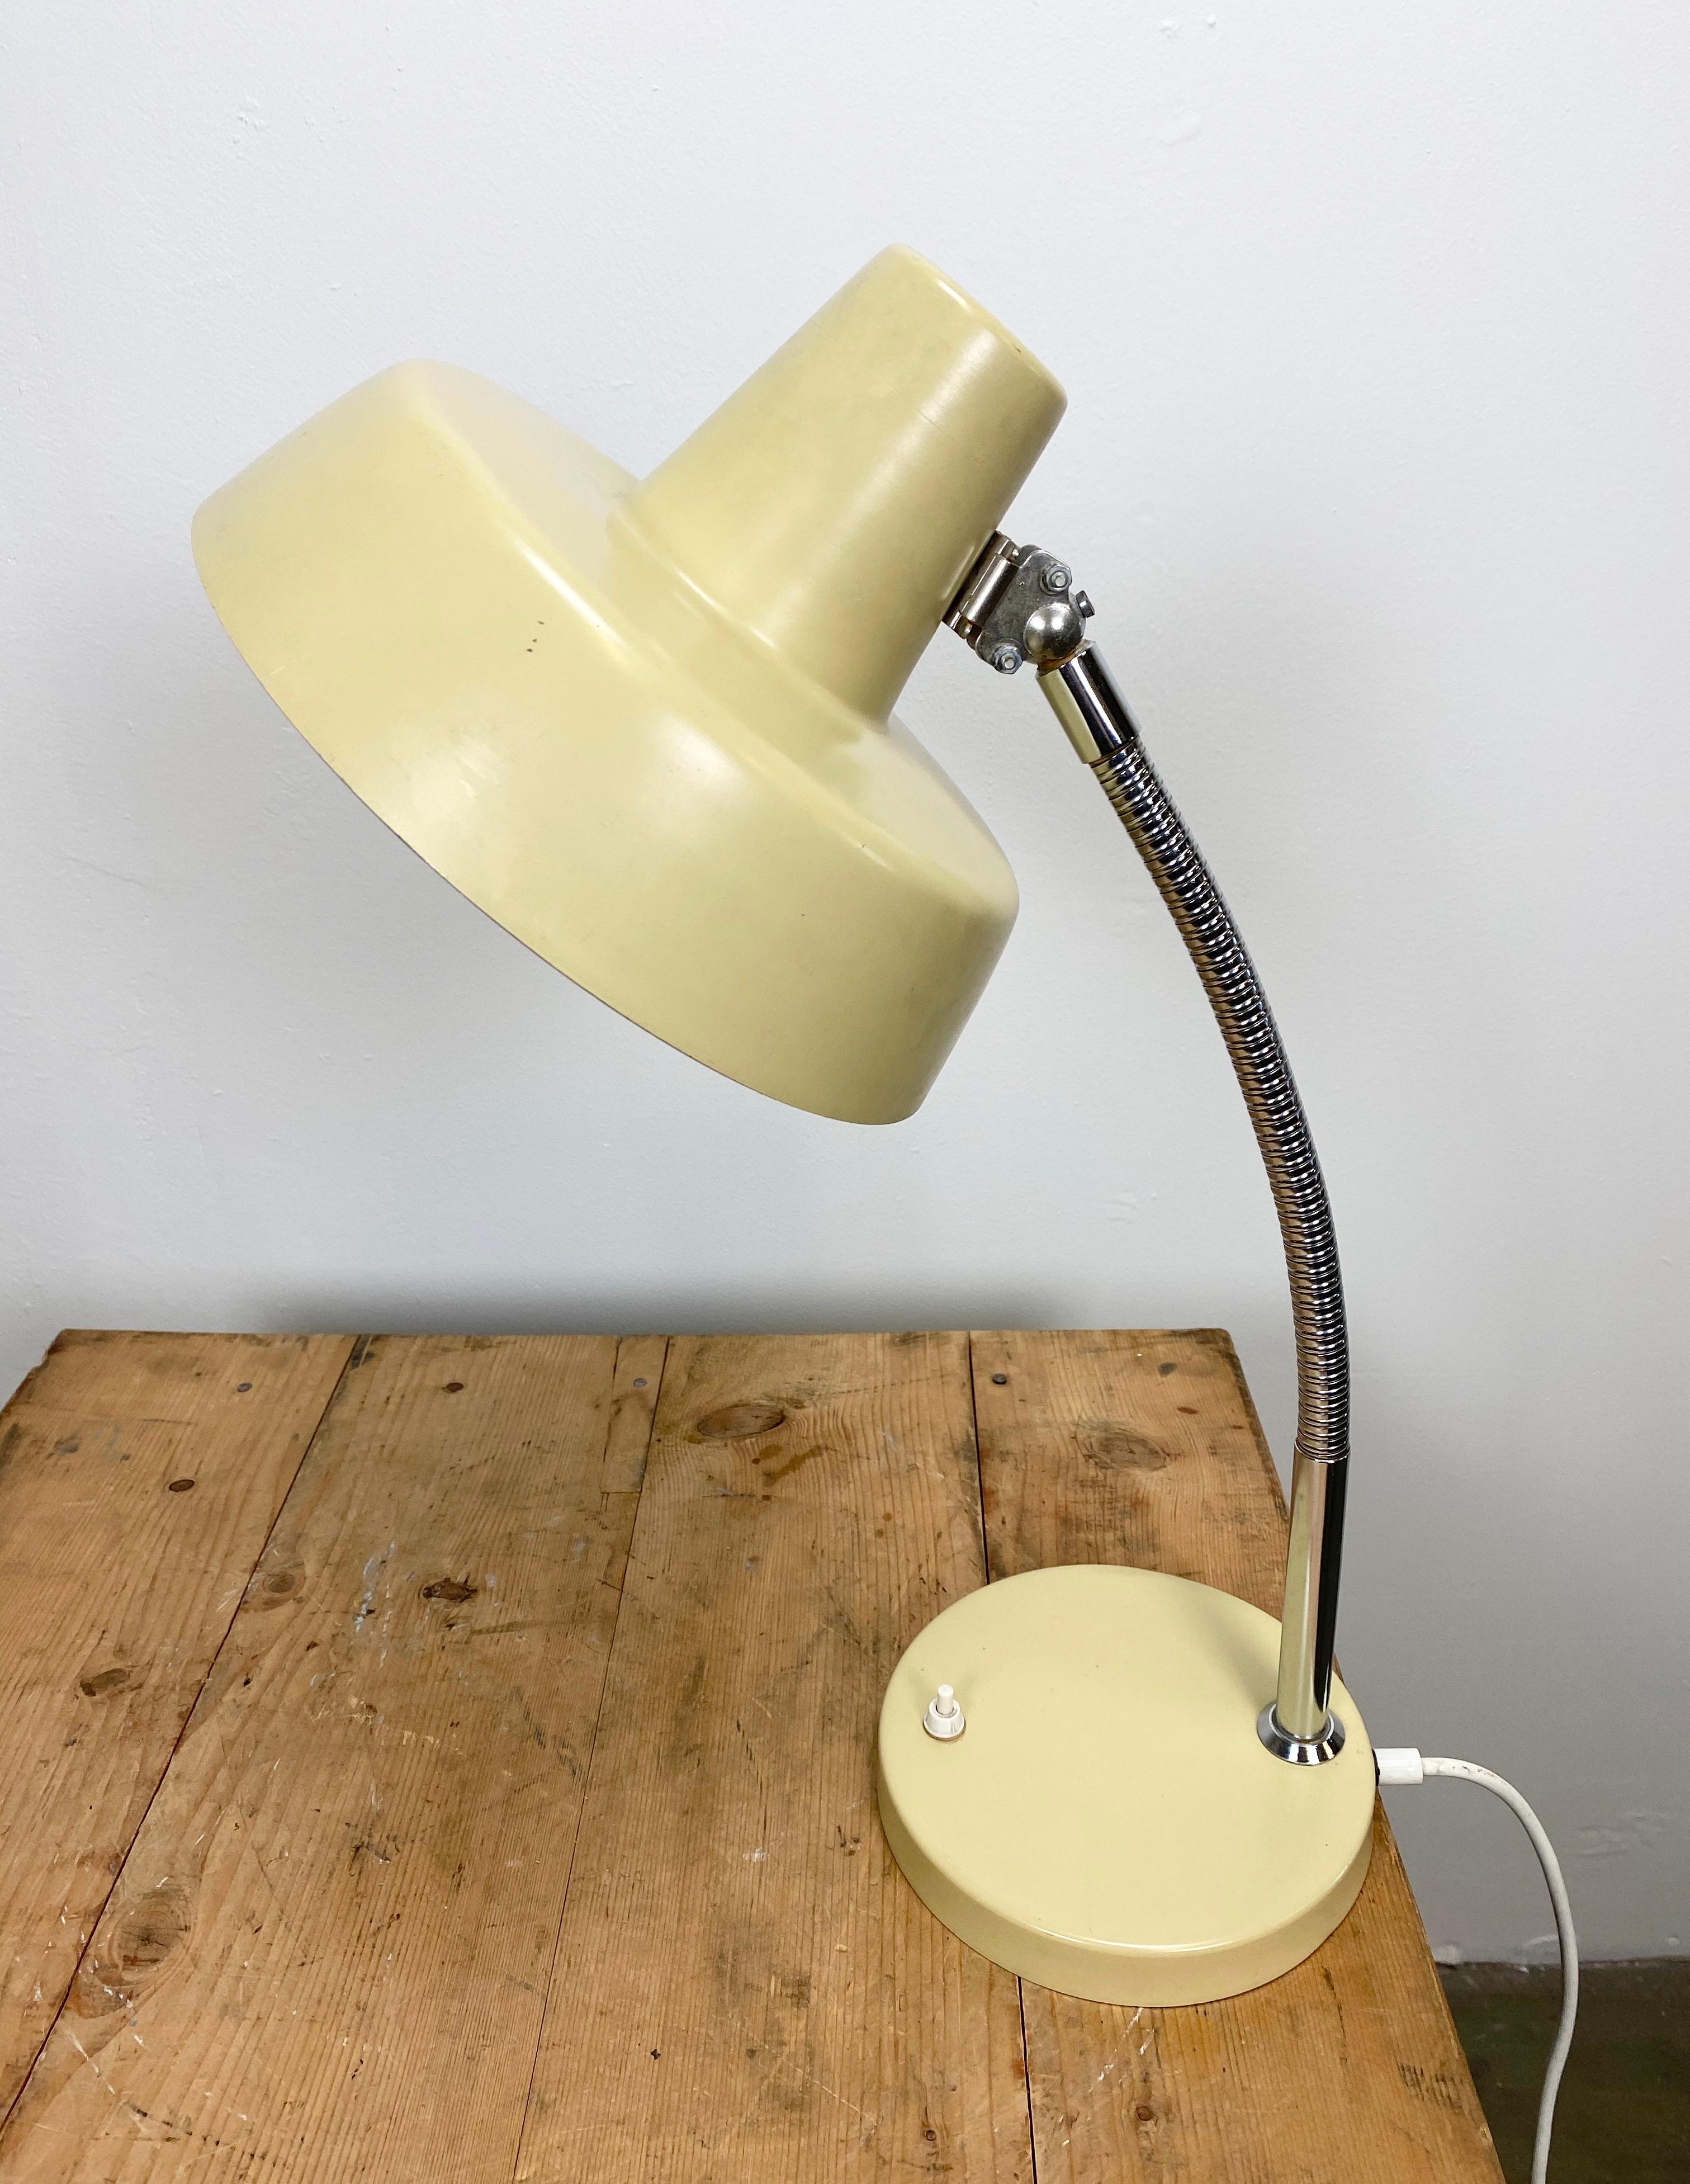 This desk lamp from the 1960s was designed and manufactured in former Czechoslovakia. It features a chrome-plated flexible arm, beige metal base and shade. The socket for E 27 lightbulbs. Fully functional. Original vintage condition.
Diameter of